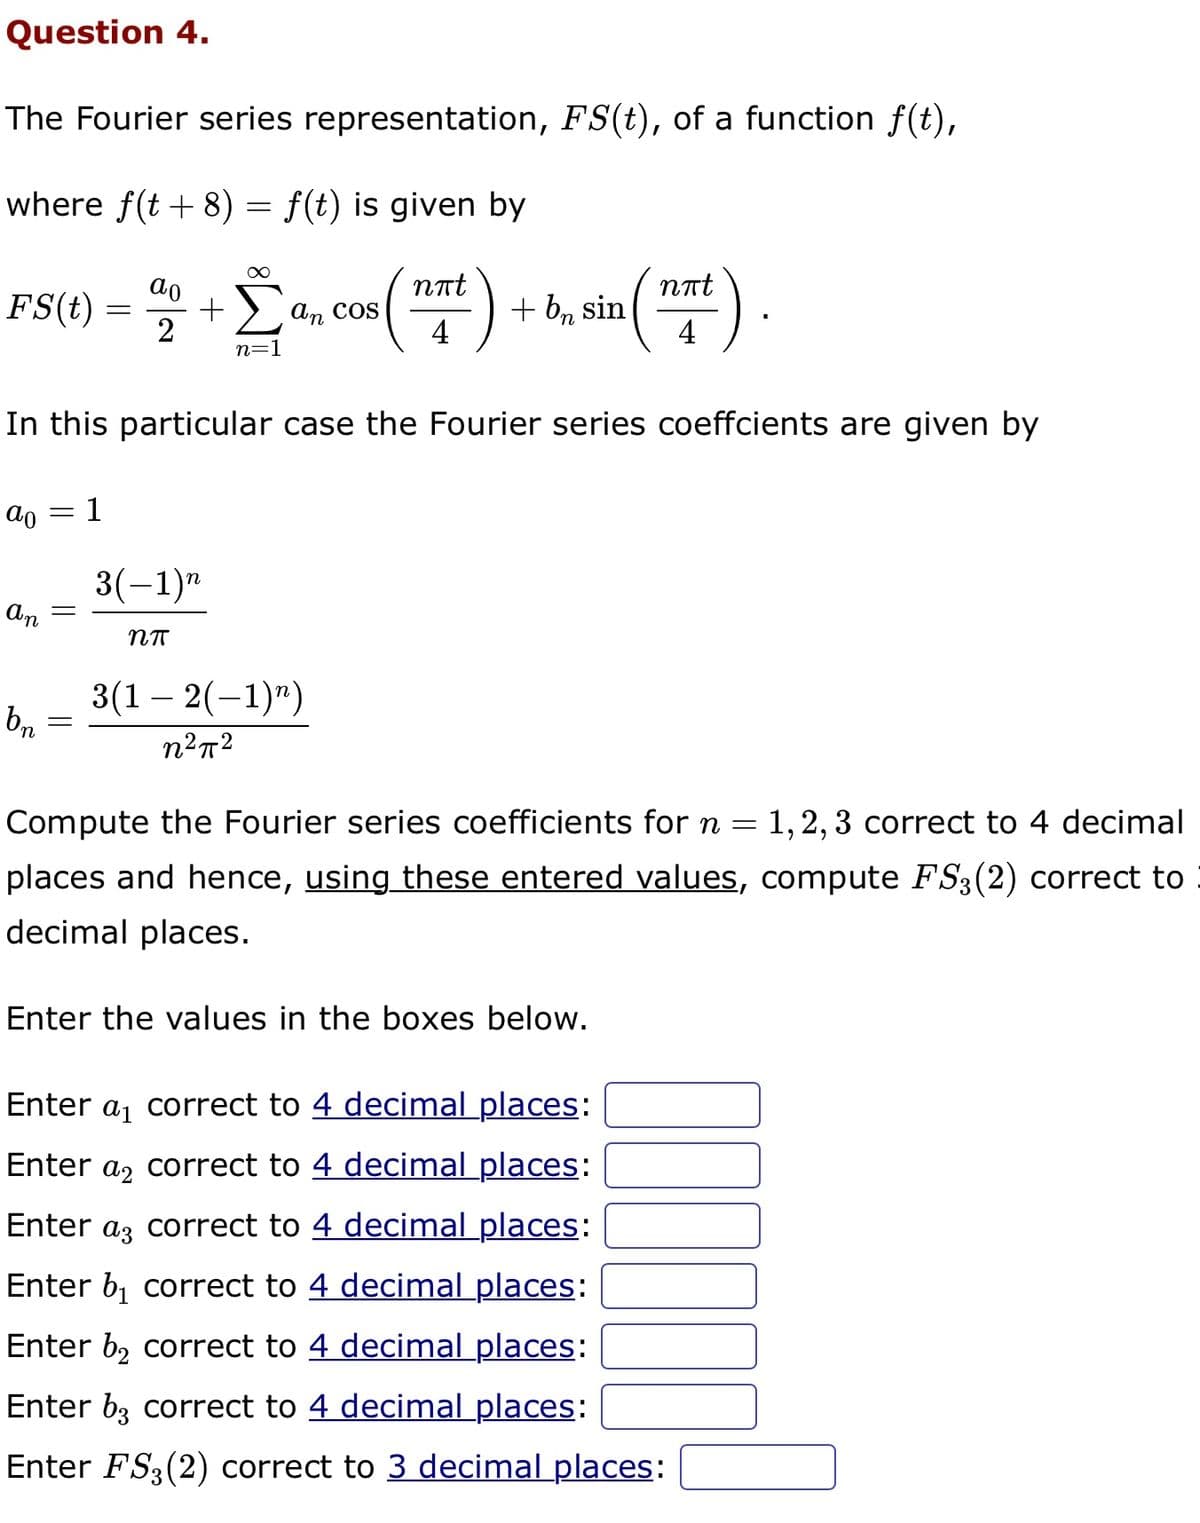 Question 4.
The Fourier series representation, FS(t), of a function f(t),
where f(t + 8) = f(t) is given by
nπt
FS(t) = 4+ [a, cos(xt) -
Σ
2
4
n=1
an
In this particular case the Fourier series coeffcients are given by
ao 1
bn
=
=
=
3(-1)"
Nπ
+ bn sin
3(1-2(−1)n)
n²π²
nπt
4
Compute the Fourier series coefficients for n = 1, 2, 3 correct to 4 decimal
places and hence, using these entered values, compute FS3 (2) correct to
decimal places.
Enter the values in the boxes below.
Enter a₁ correct to 4 decimal places:
Enter a correct to 4 decimal places:
Enter a correct to 4 decimal places:
Enter b₁ correct to 4 decimal places:
Enter b₂ correct to 4 decimal places:
Enter b3 correct to 4 decimal places:
Enter FS3 (2) correct to 3 decimal places: